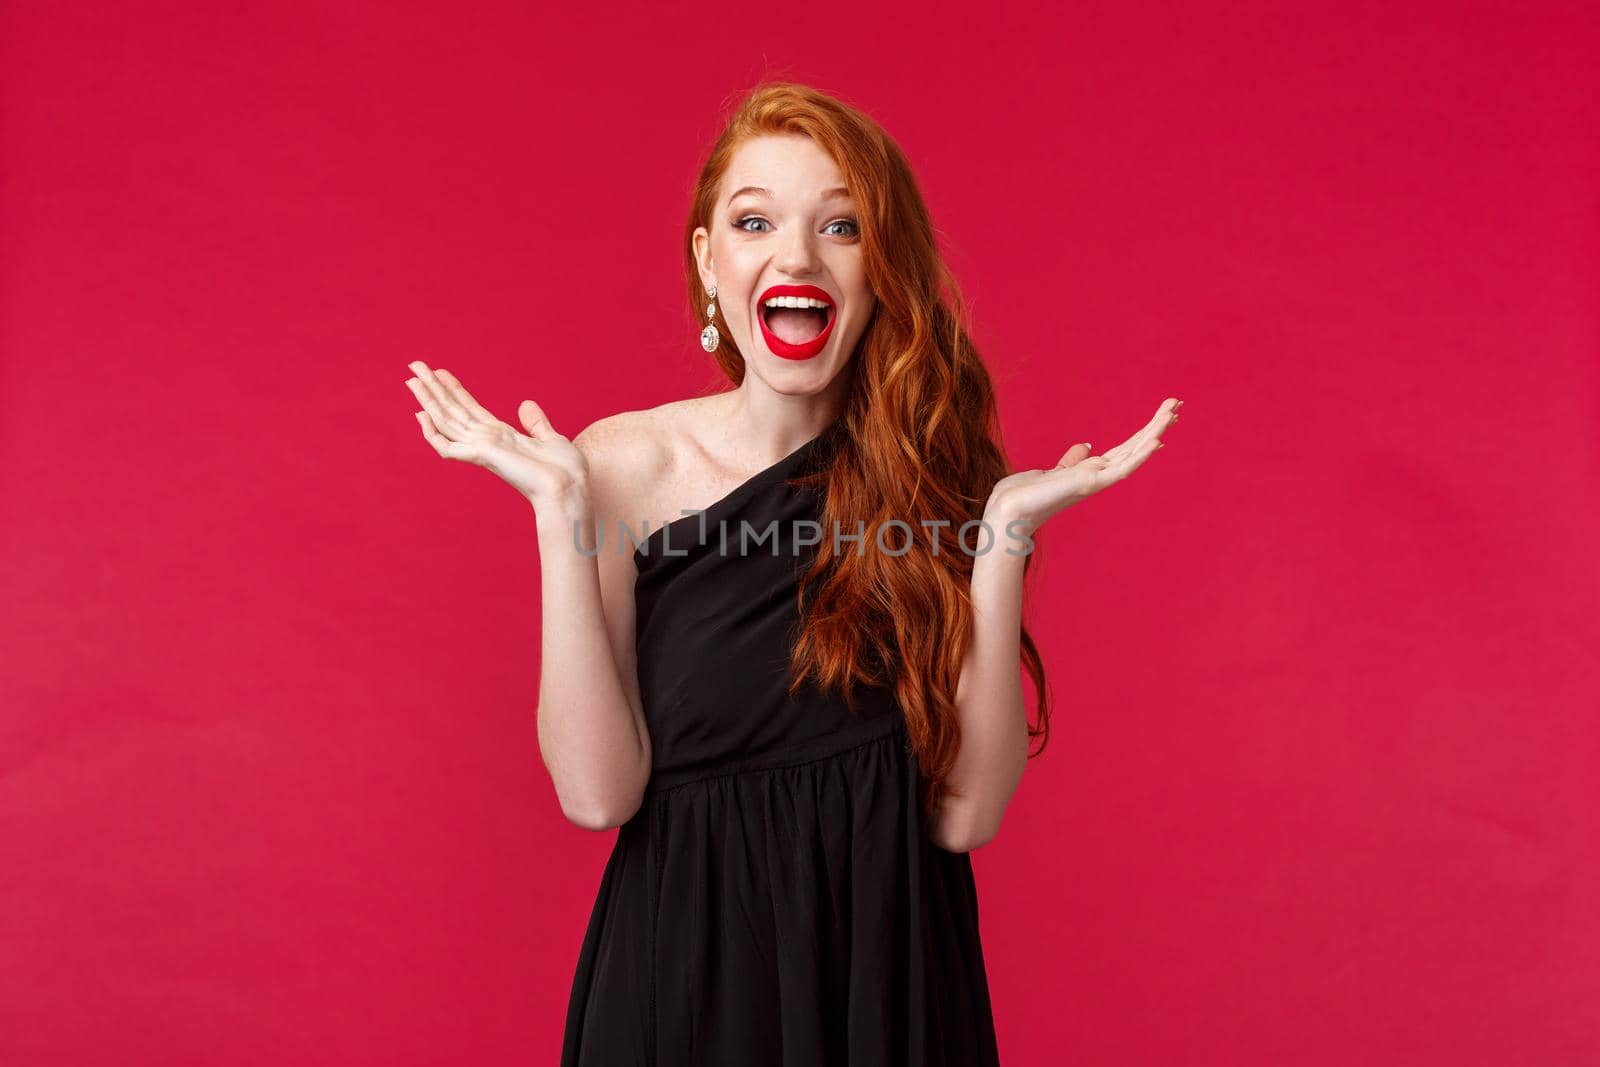 Fashion, luxury and beauty concept. What a nice surpirse. Amused and happy, excited redhead woman in elegant black dress, applause as attend awesome performance, stand red background.